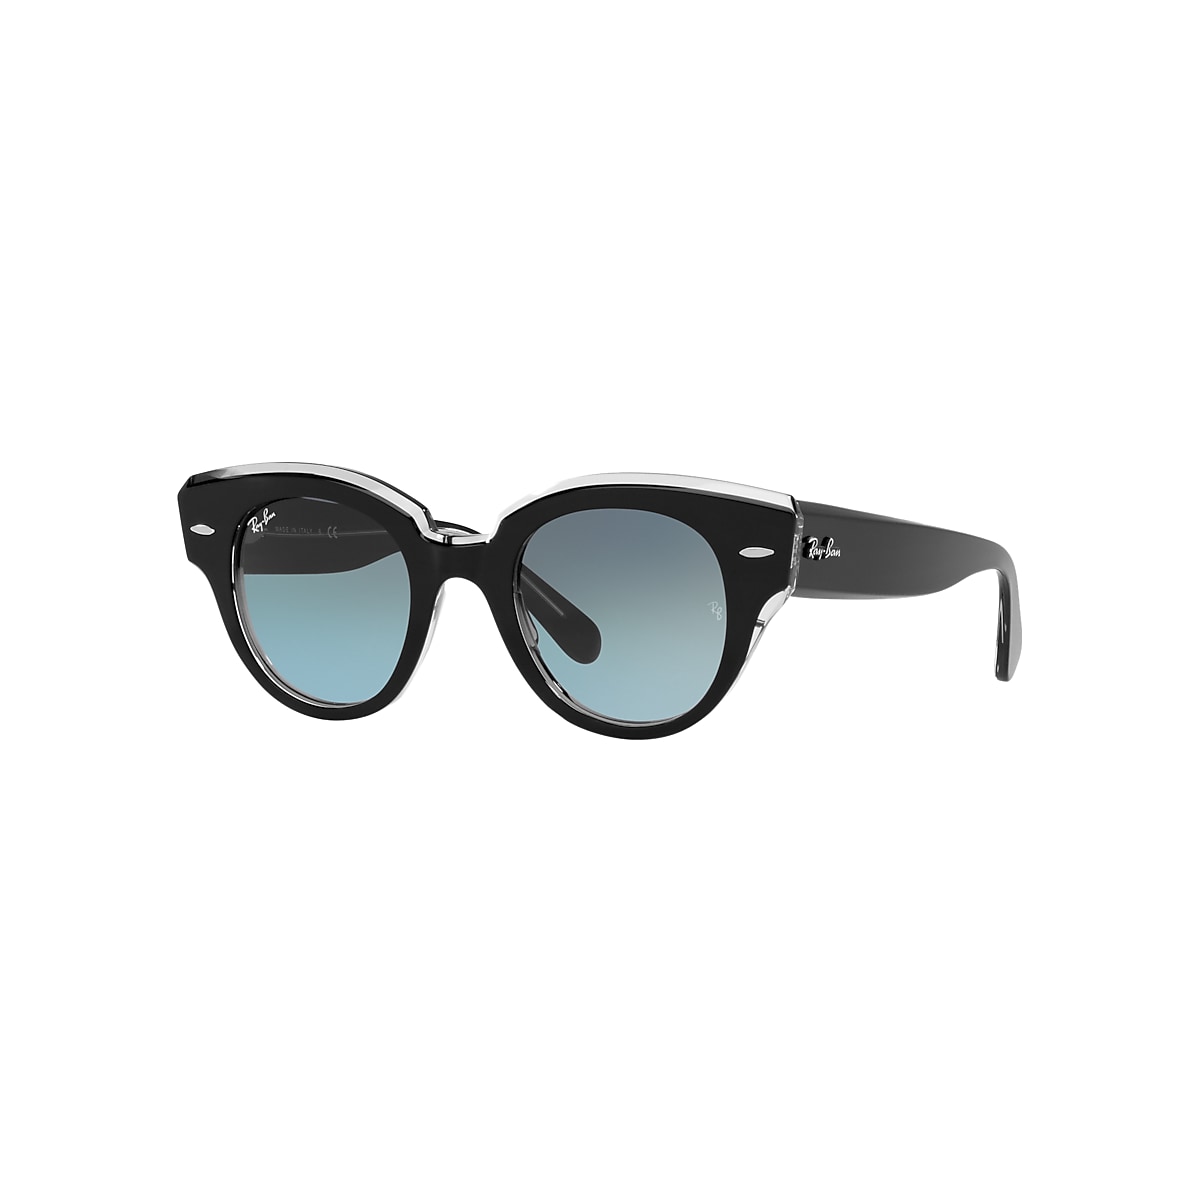 ROUNDABOUT Sunglasses in Black On Transparent and Blue 